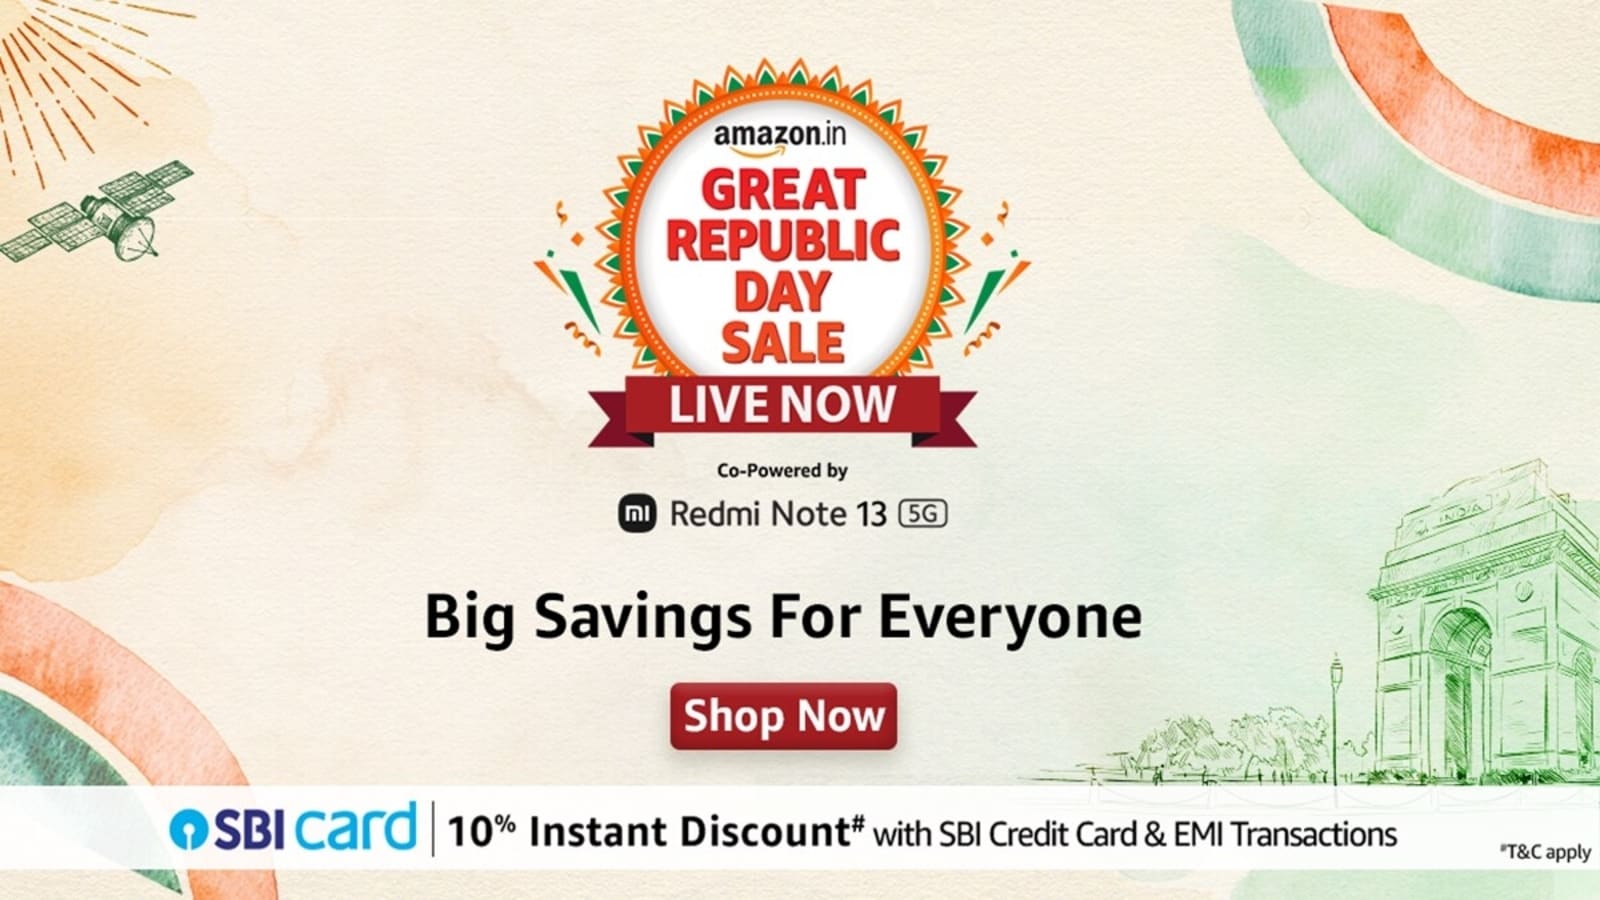 Amazon Mega Deals Live Today: Offers you just can't ignore! Check out the gigantic discounts